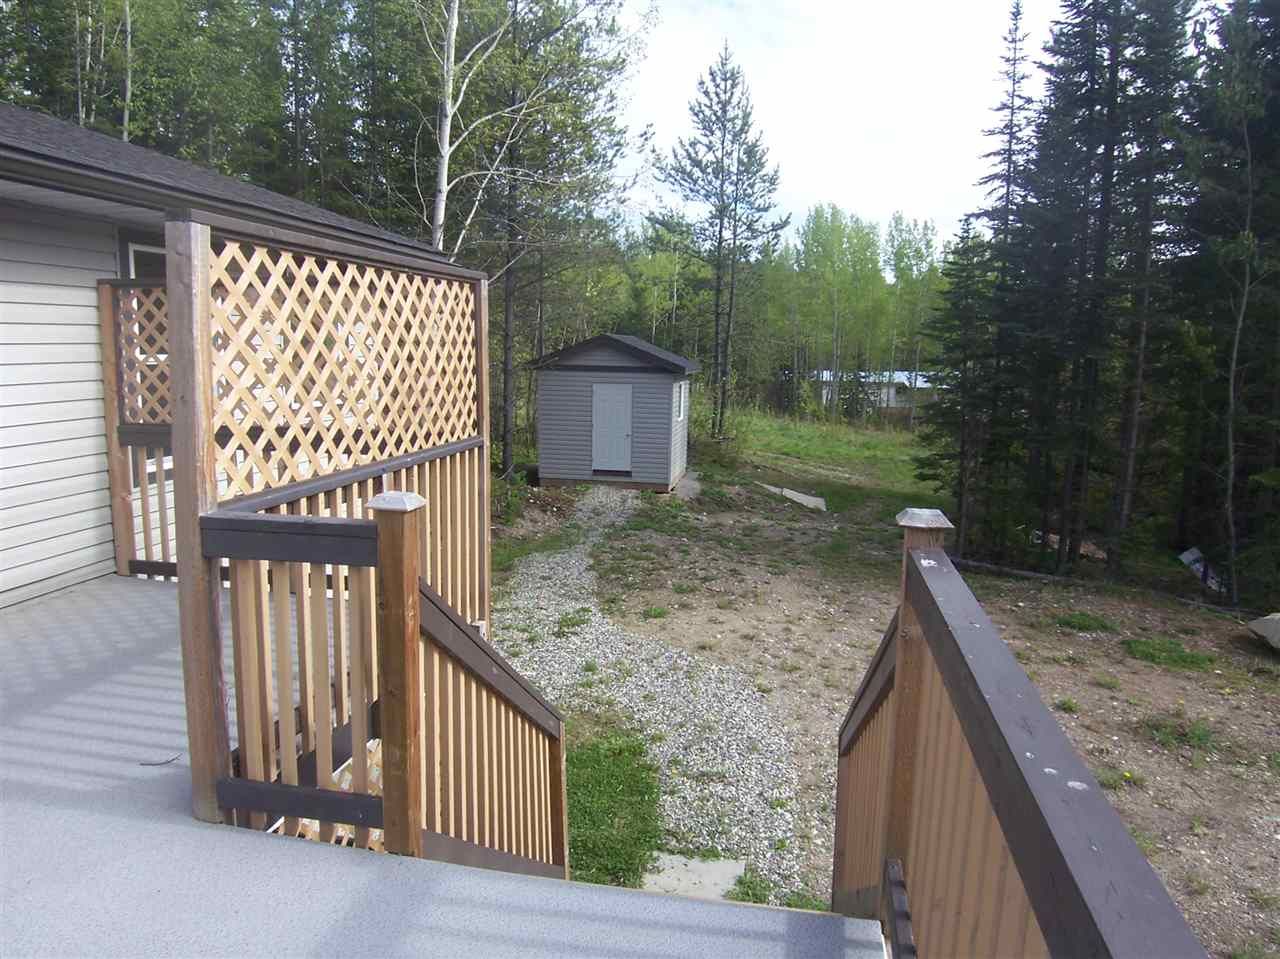 Photo 4: Photos: 1222 HLADY Road in Quesnel: Quesnel - Rural North House for sale (Quesnel (Zone 28))  : MLS®# R2064015